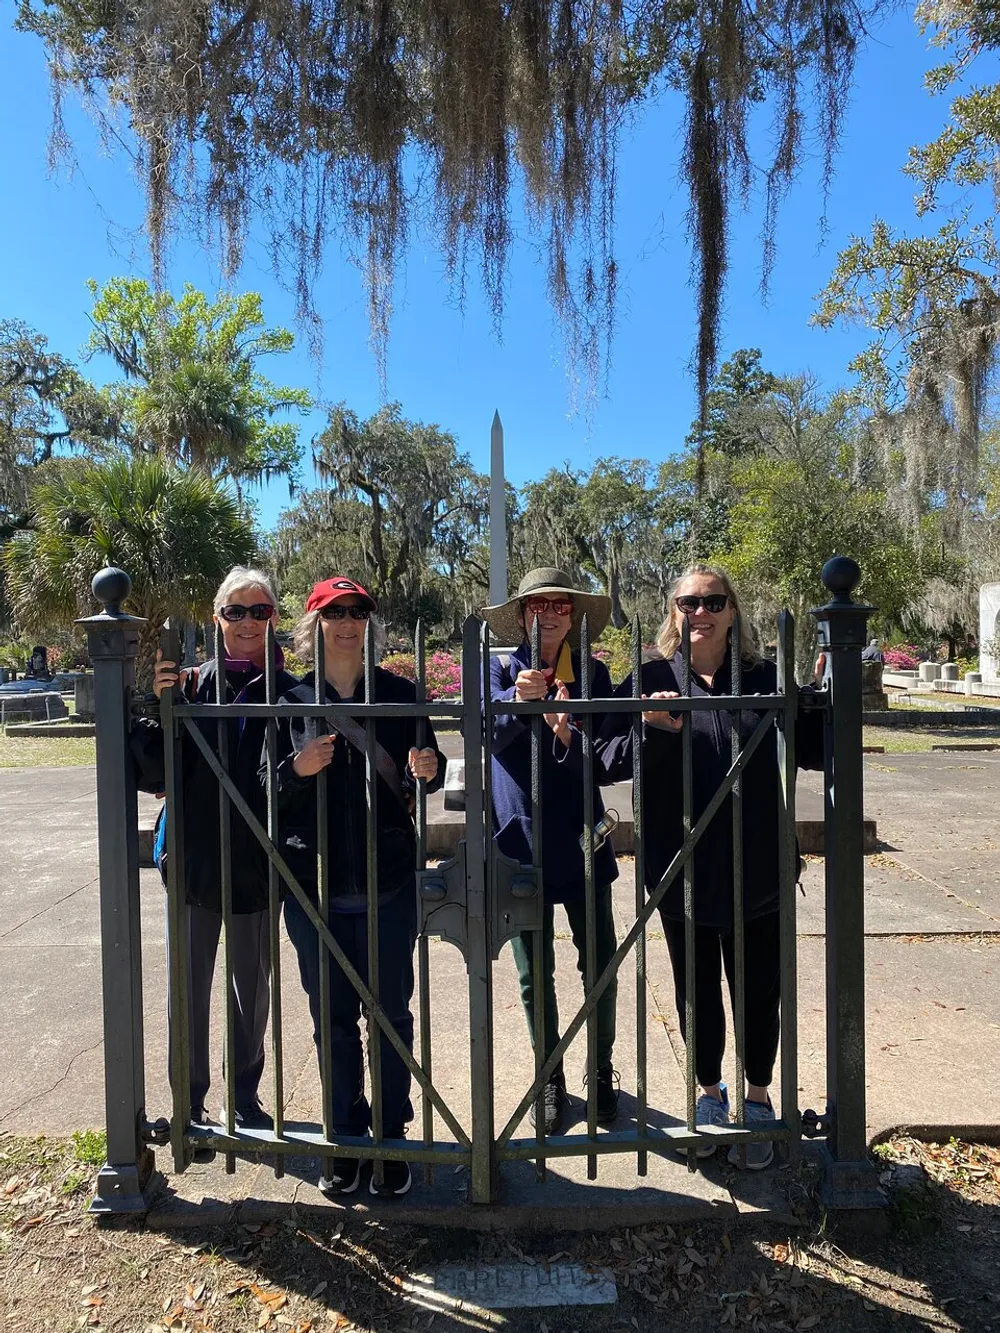 Four individuals are standing behind a metal gate in a cemetery with Spanish moss hanging from a tree above them and a clear blue sky in the background